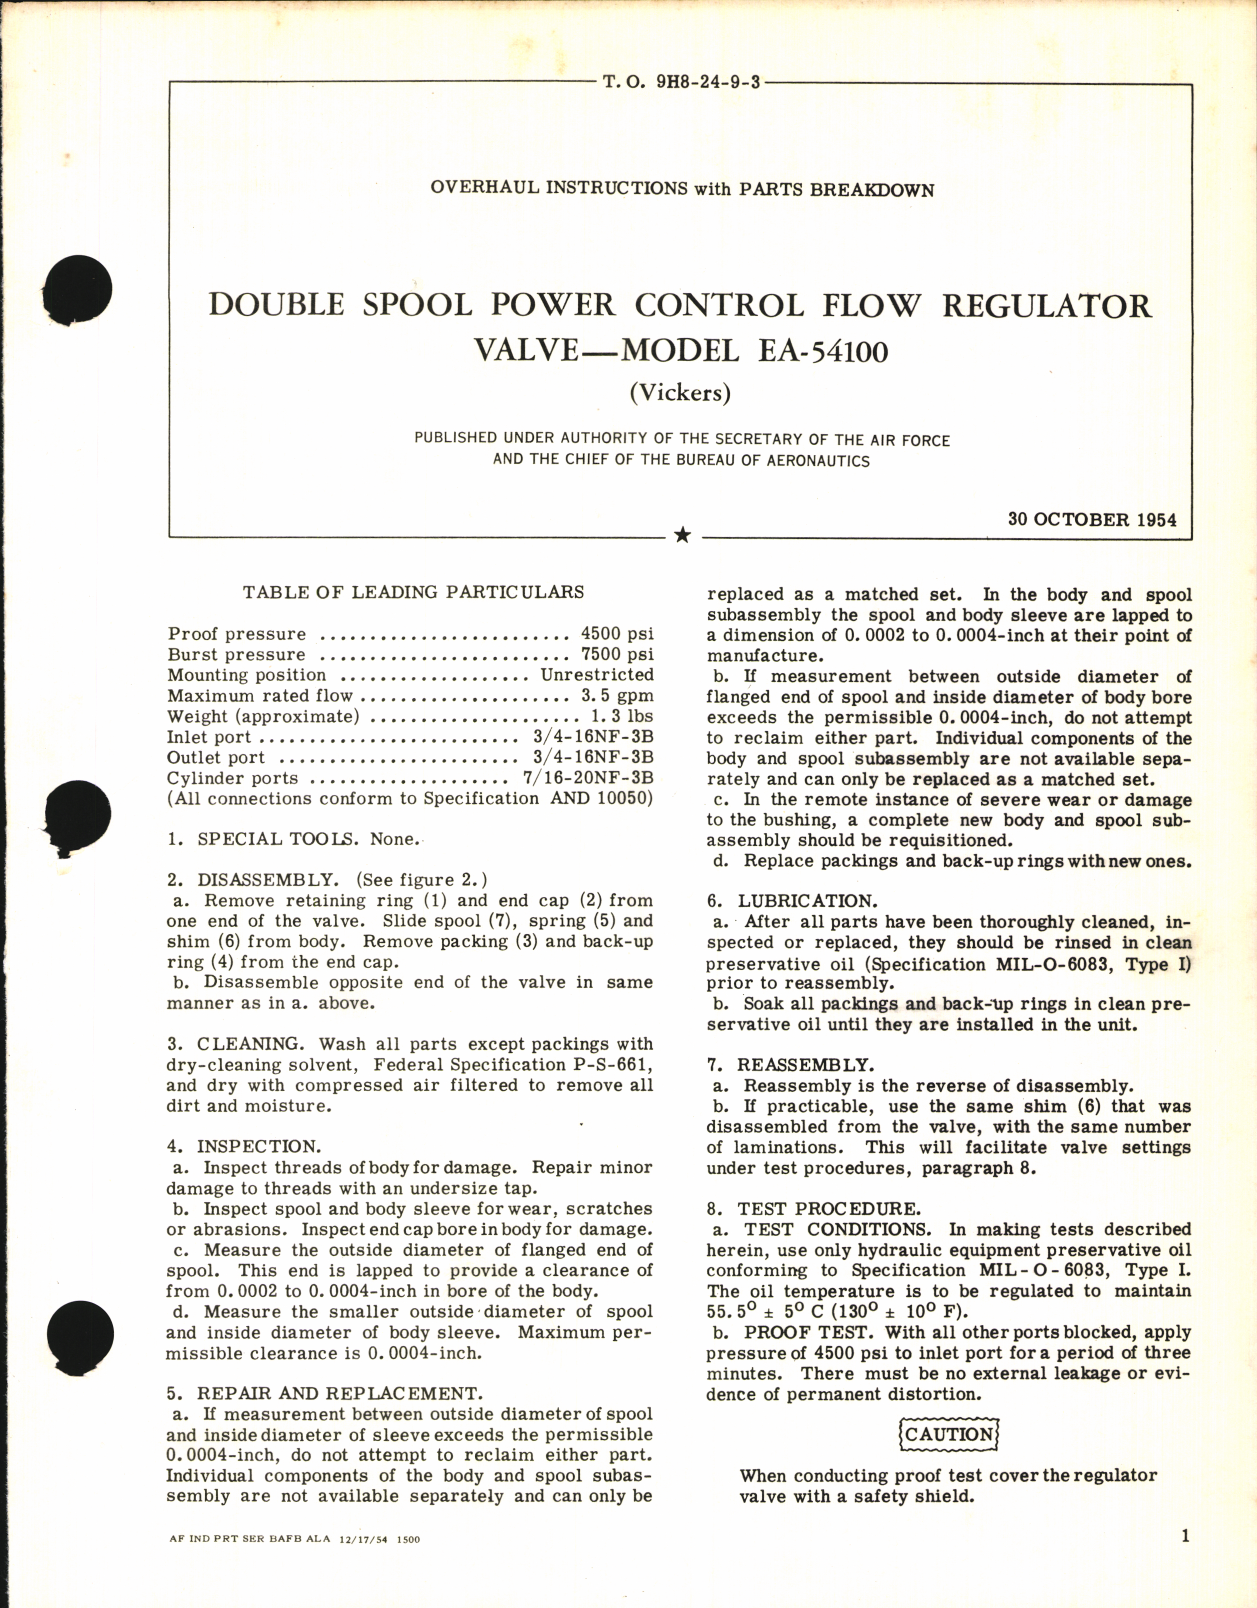 Sample page 1 from AirCorps Library document: Overhaul Instructions with Parts Breakdown for Double Spool Power Control Flow Regulator Valve Model EA-54100